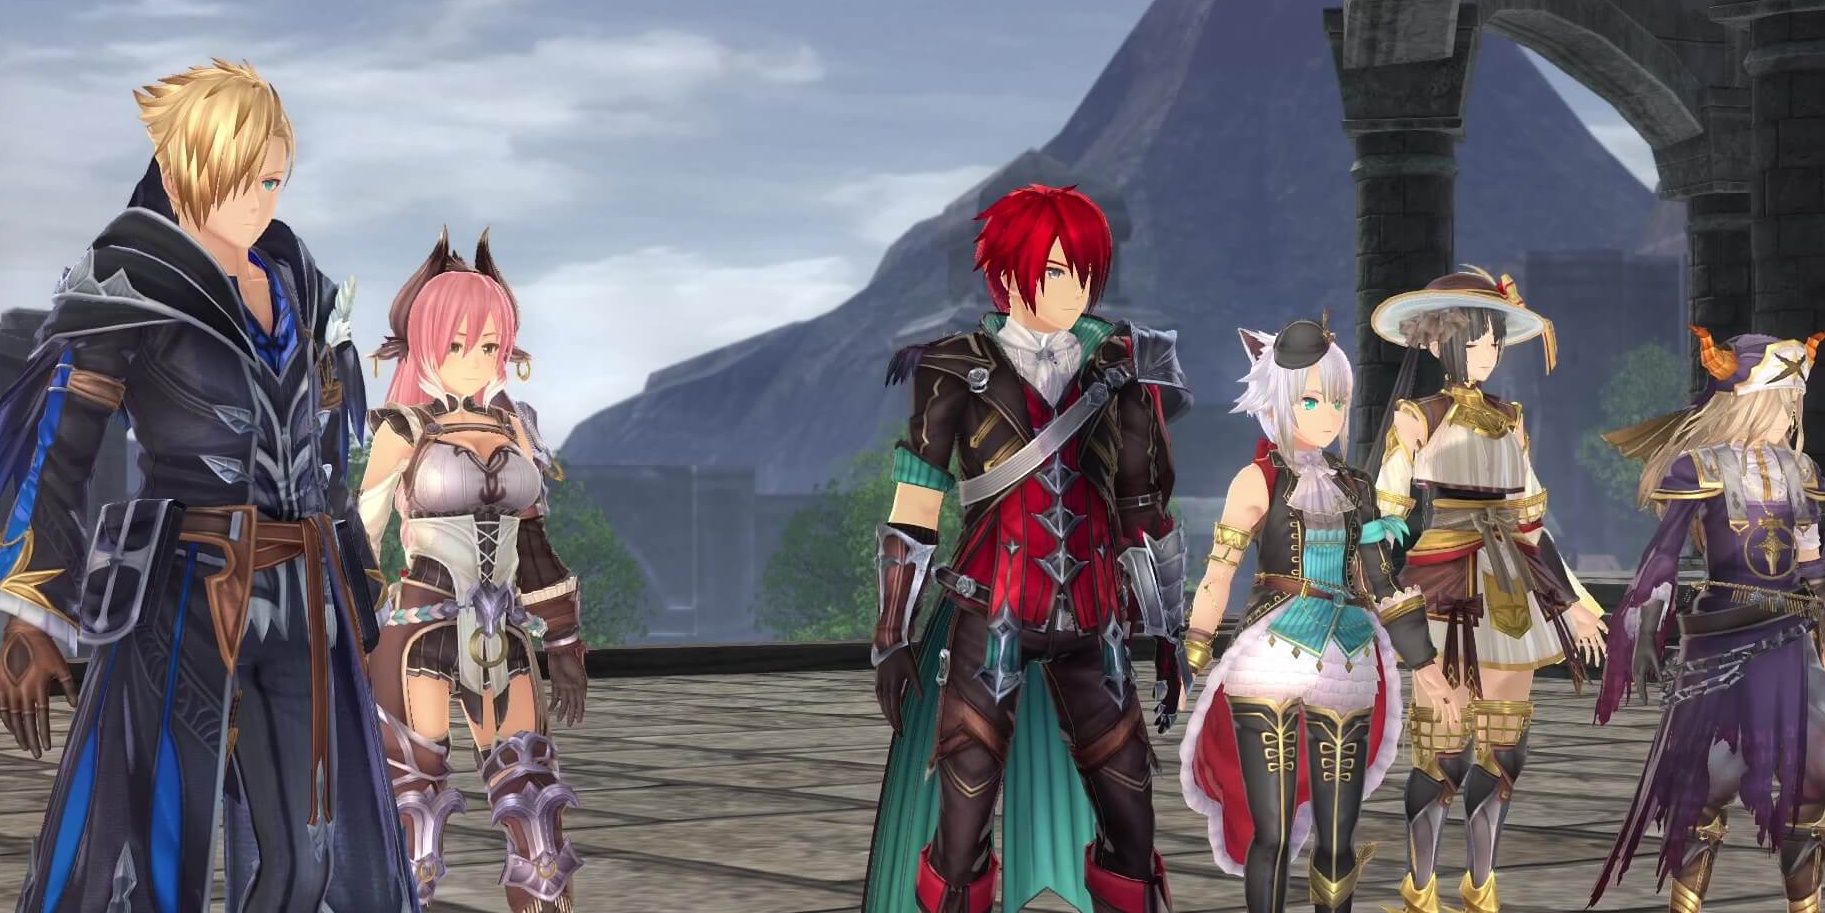 Ys 9 Adol standing with friends 